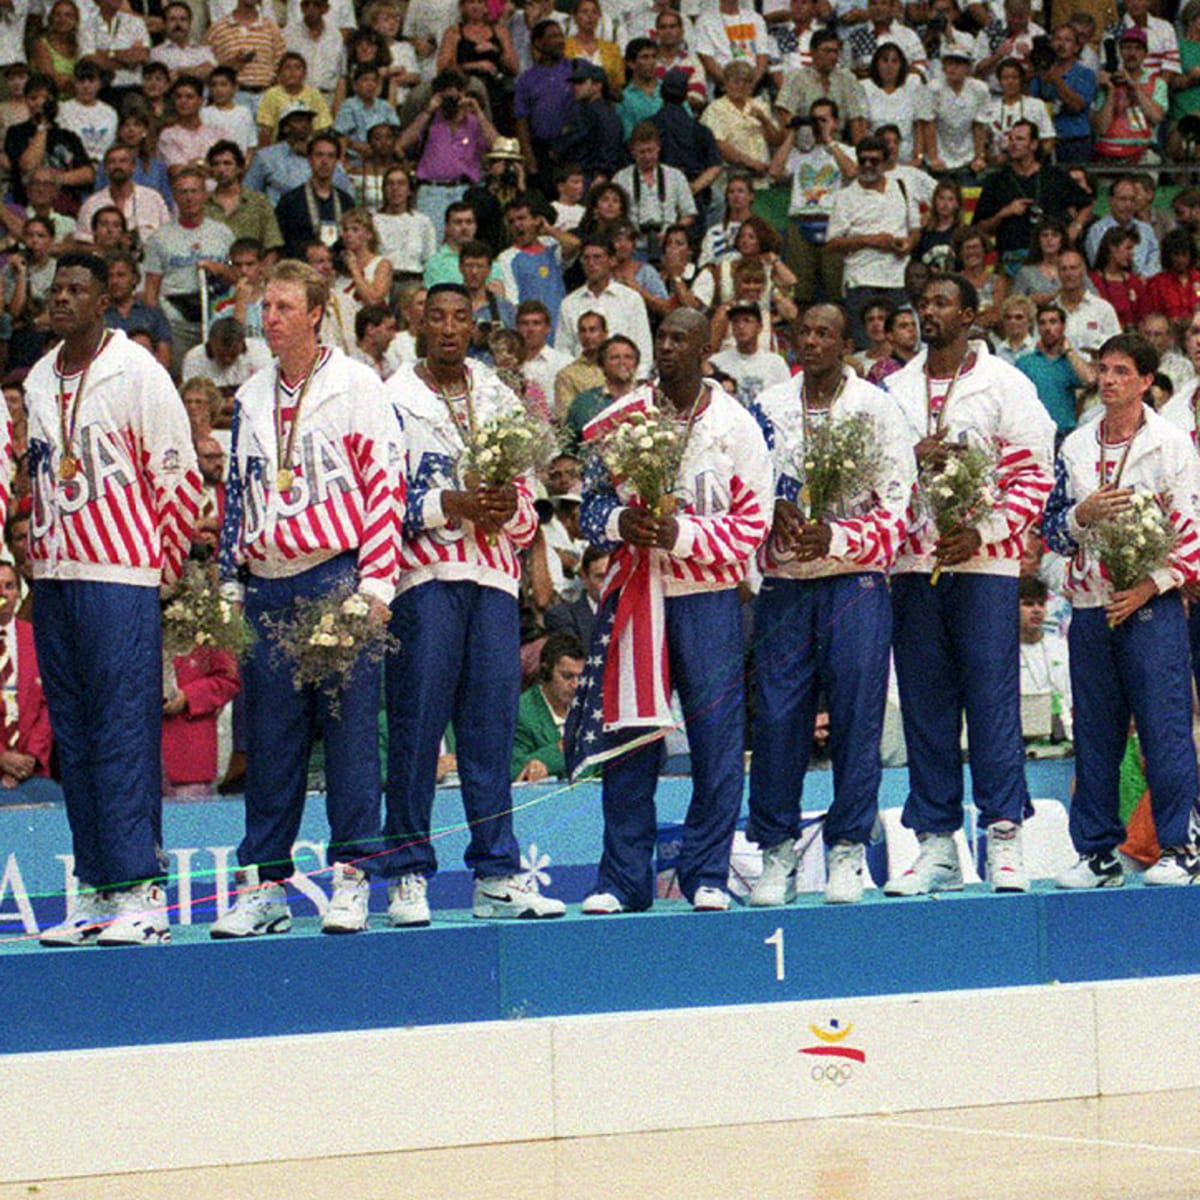 Olympics: 1992 USA Dream Team games to be aired in full - Sports